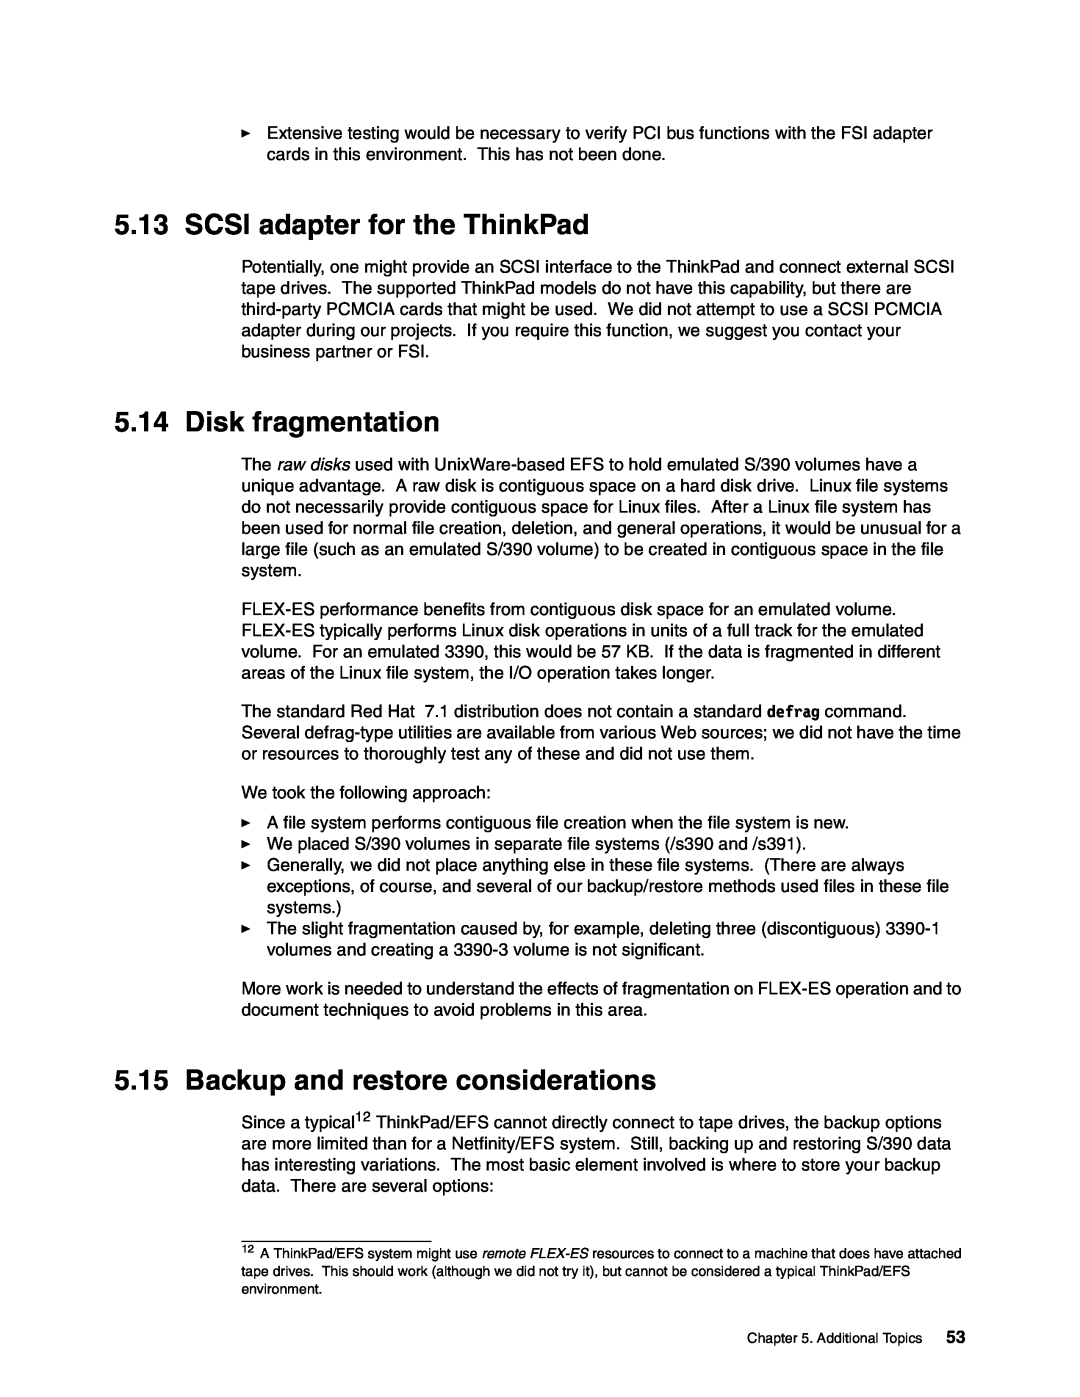 IBM s/390 manual SCSI adapter for the ThinkPad, Disk fragmentation, Backup and restore considerations 